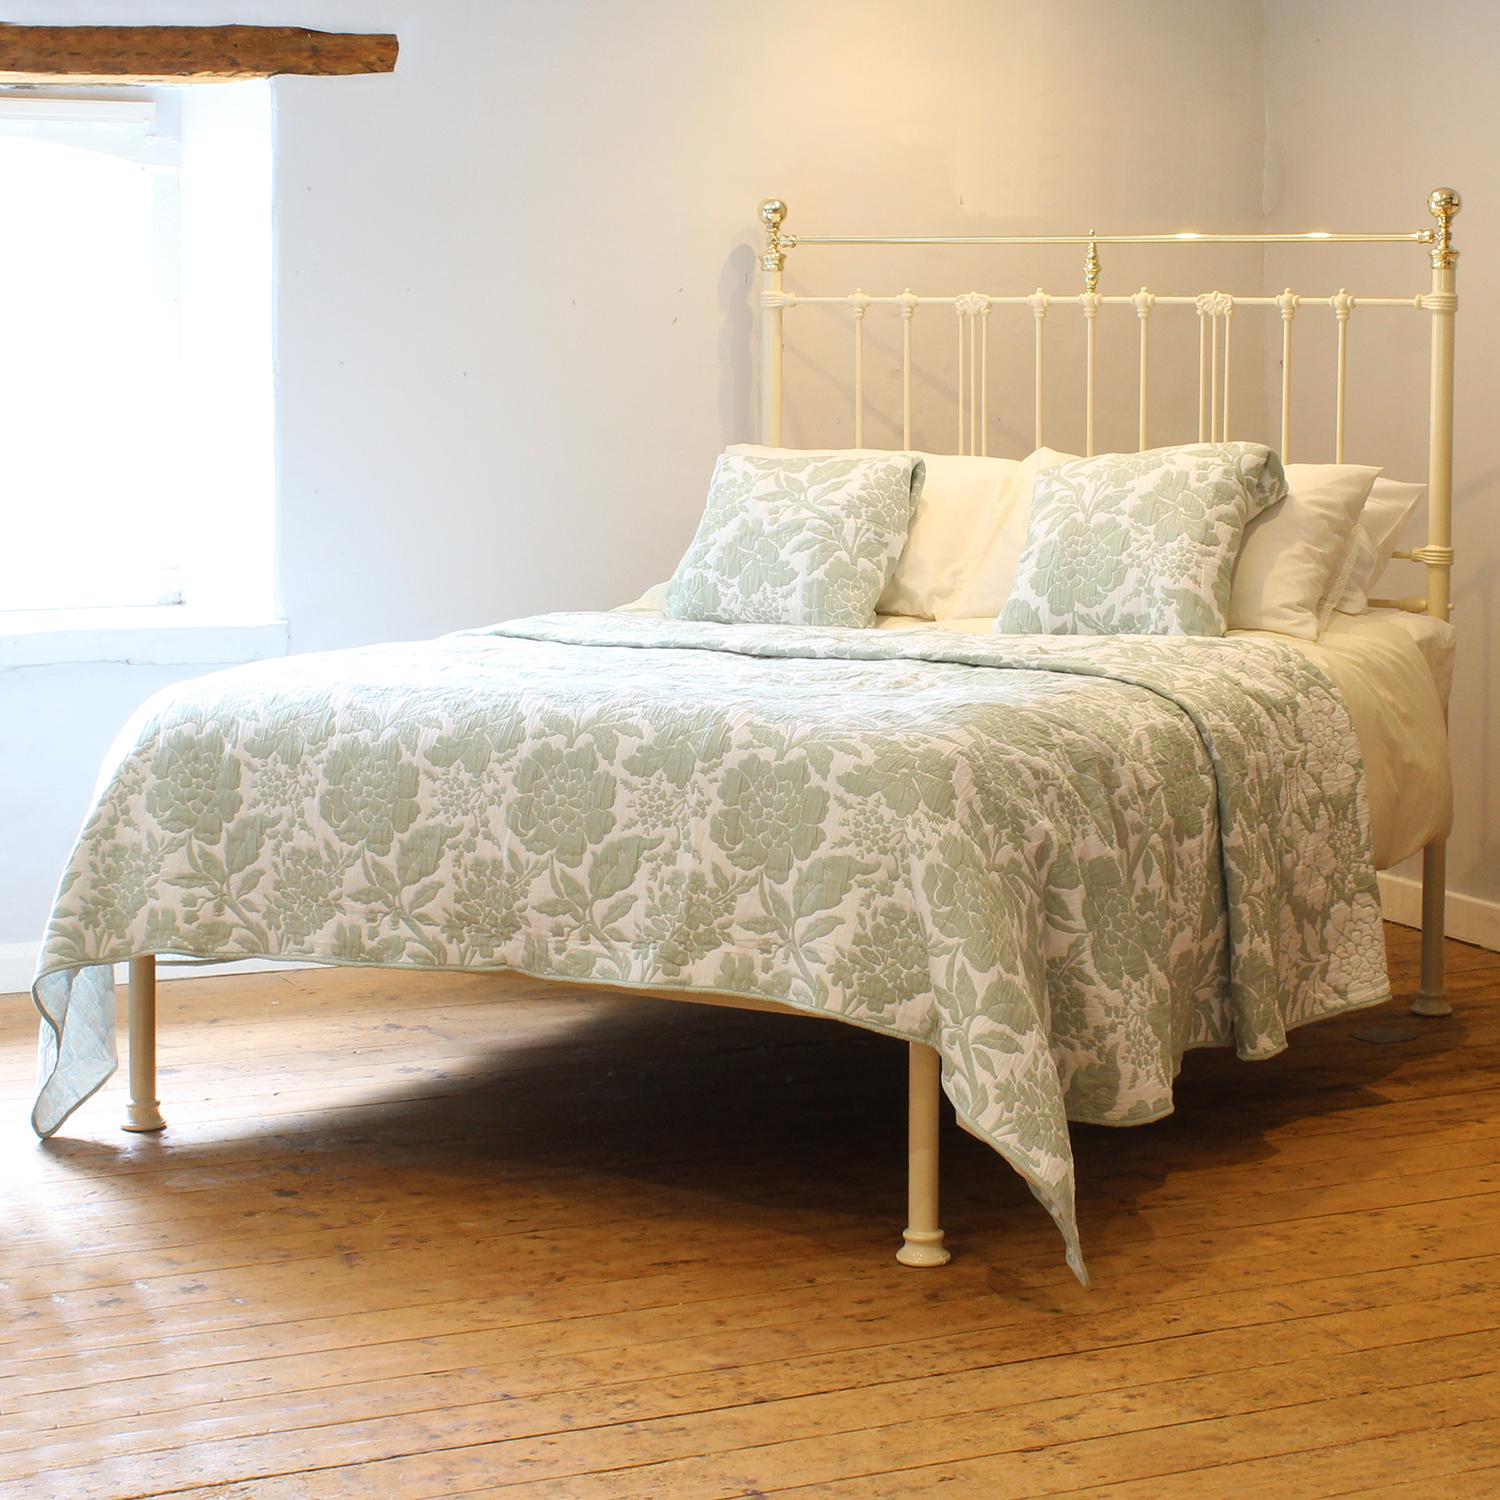 A Victorian platform brass and iron bed with brass straight top rail and low foot end finished in cream.

This bed accepts a US Queen size (or UK King Size) 60 inch wide base and mattress set.

The price includes a firm standard bed base to